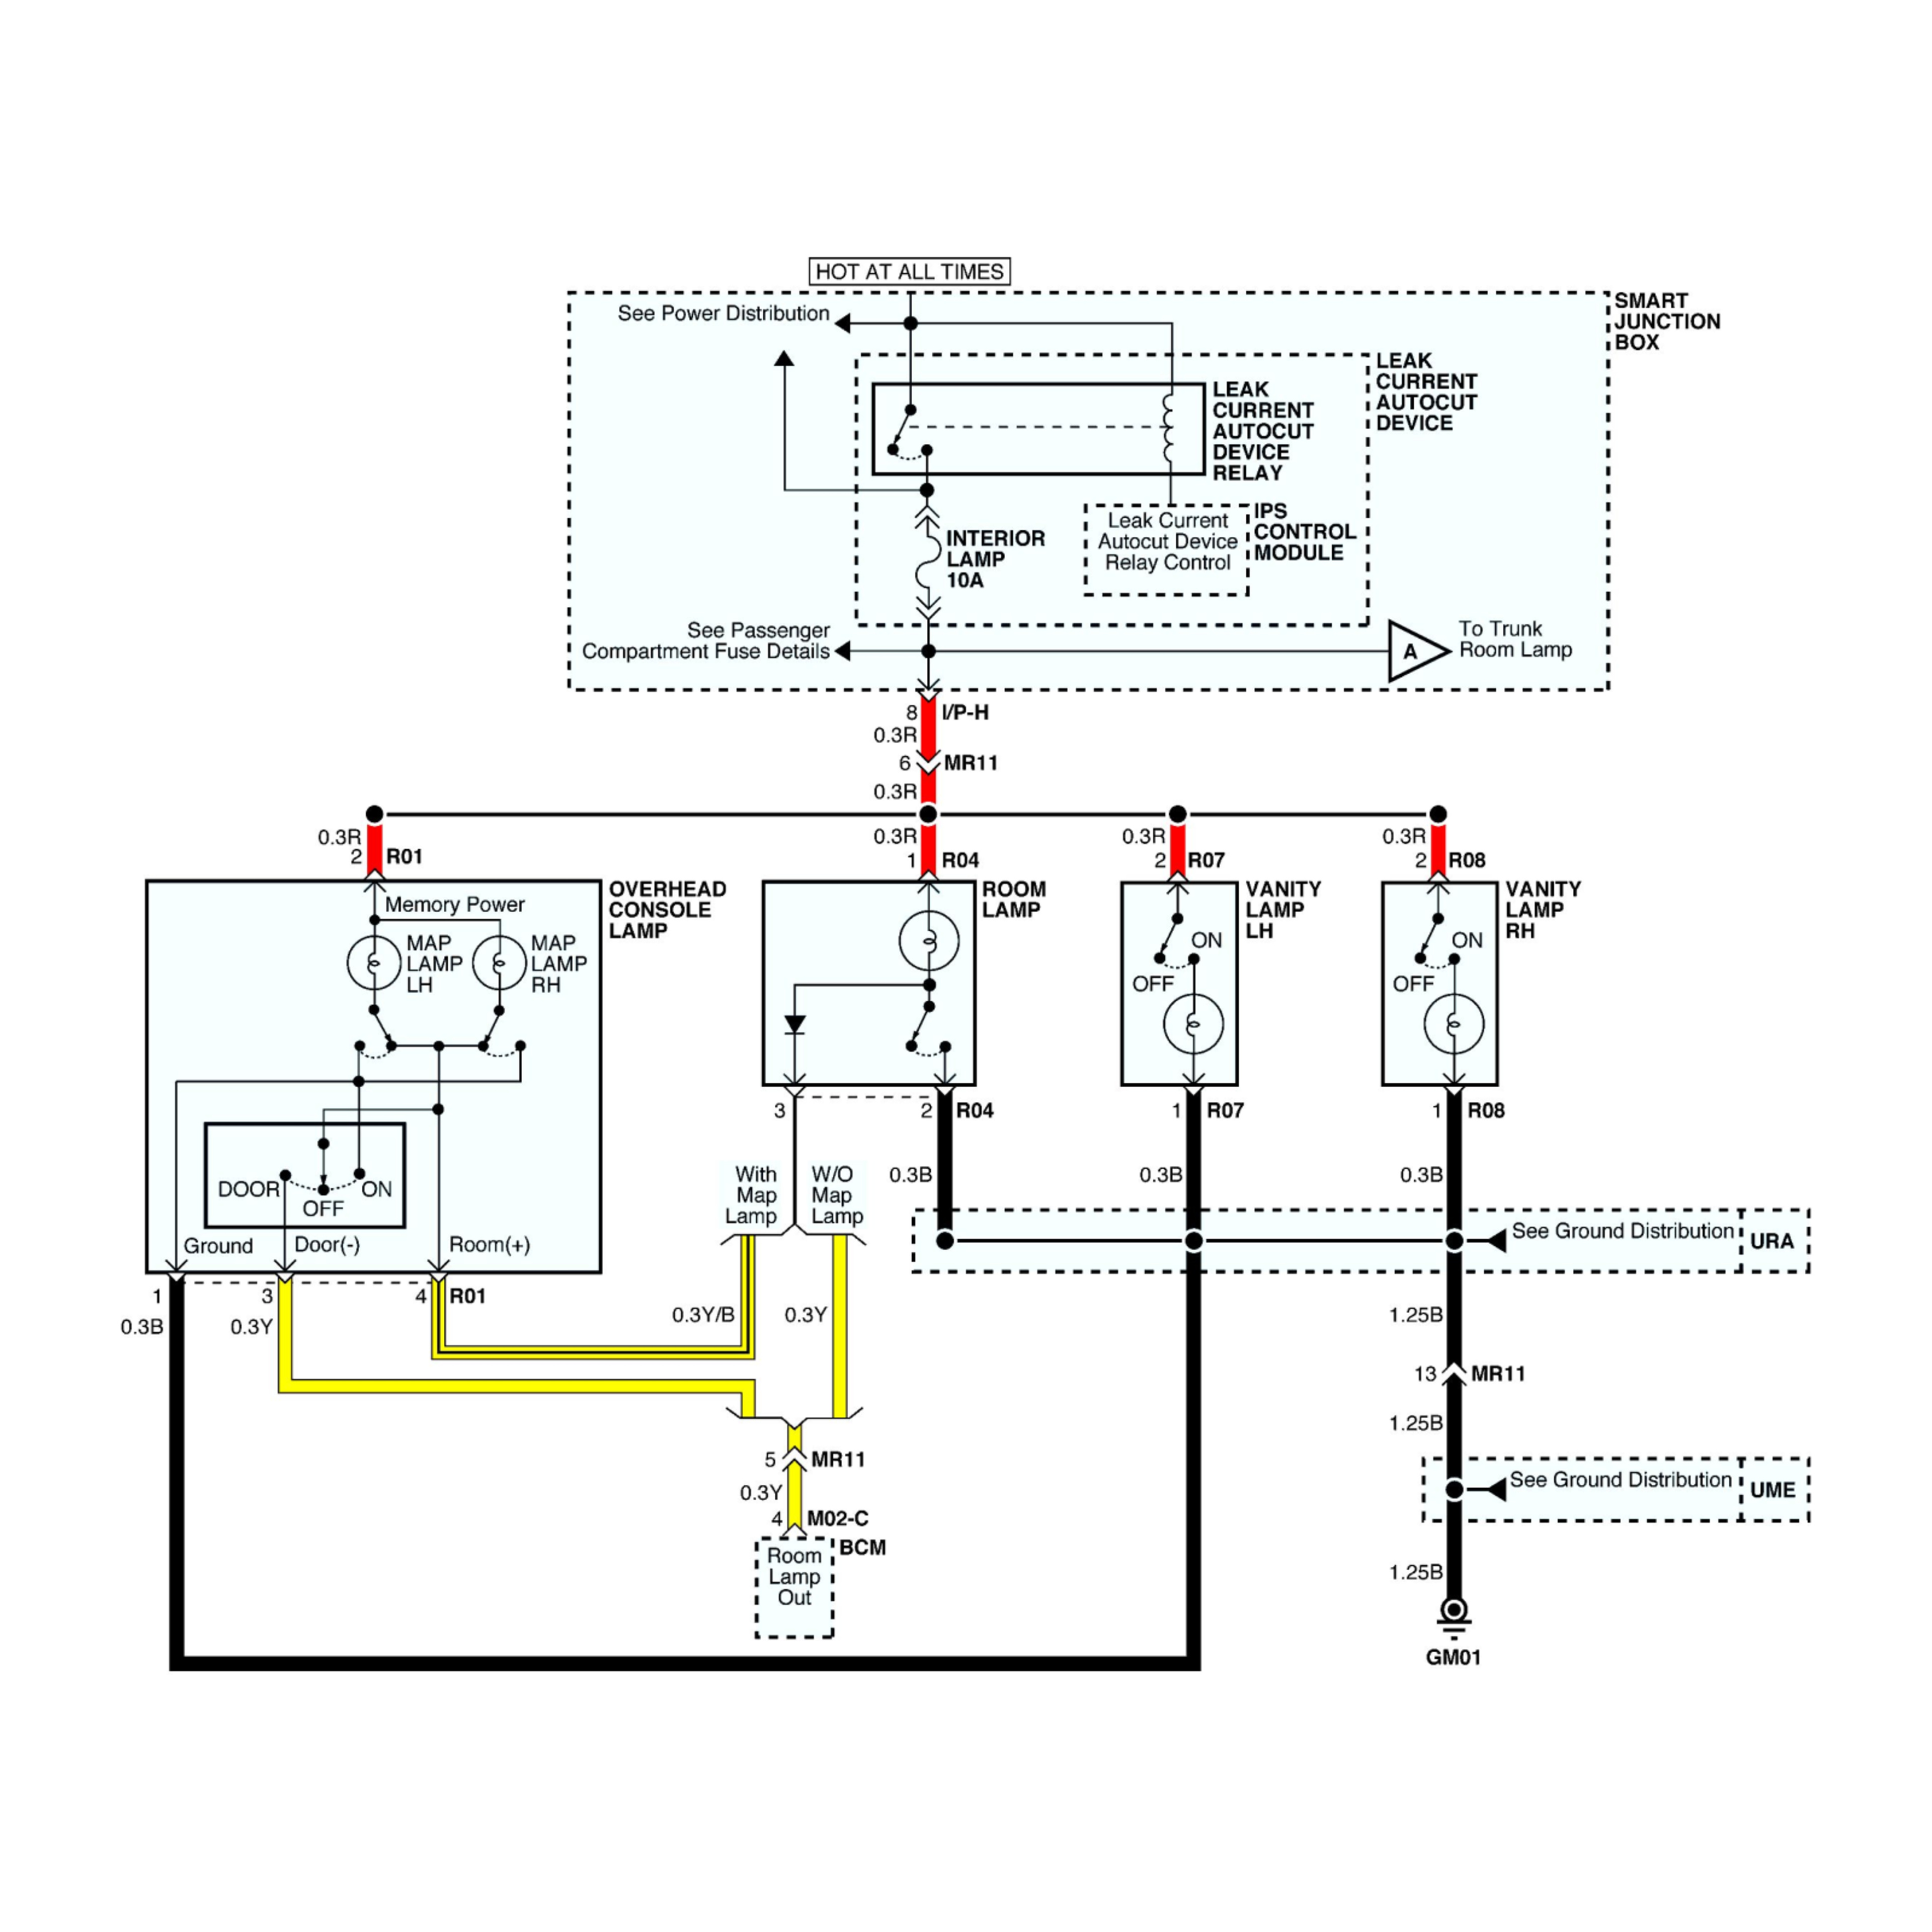 2013 Audi A3 wiring diagrams example